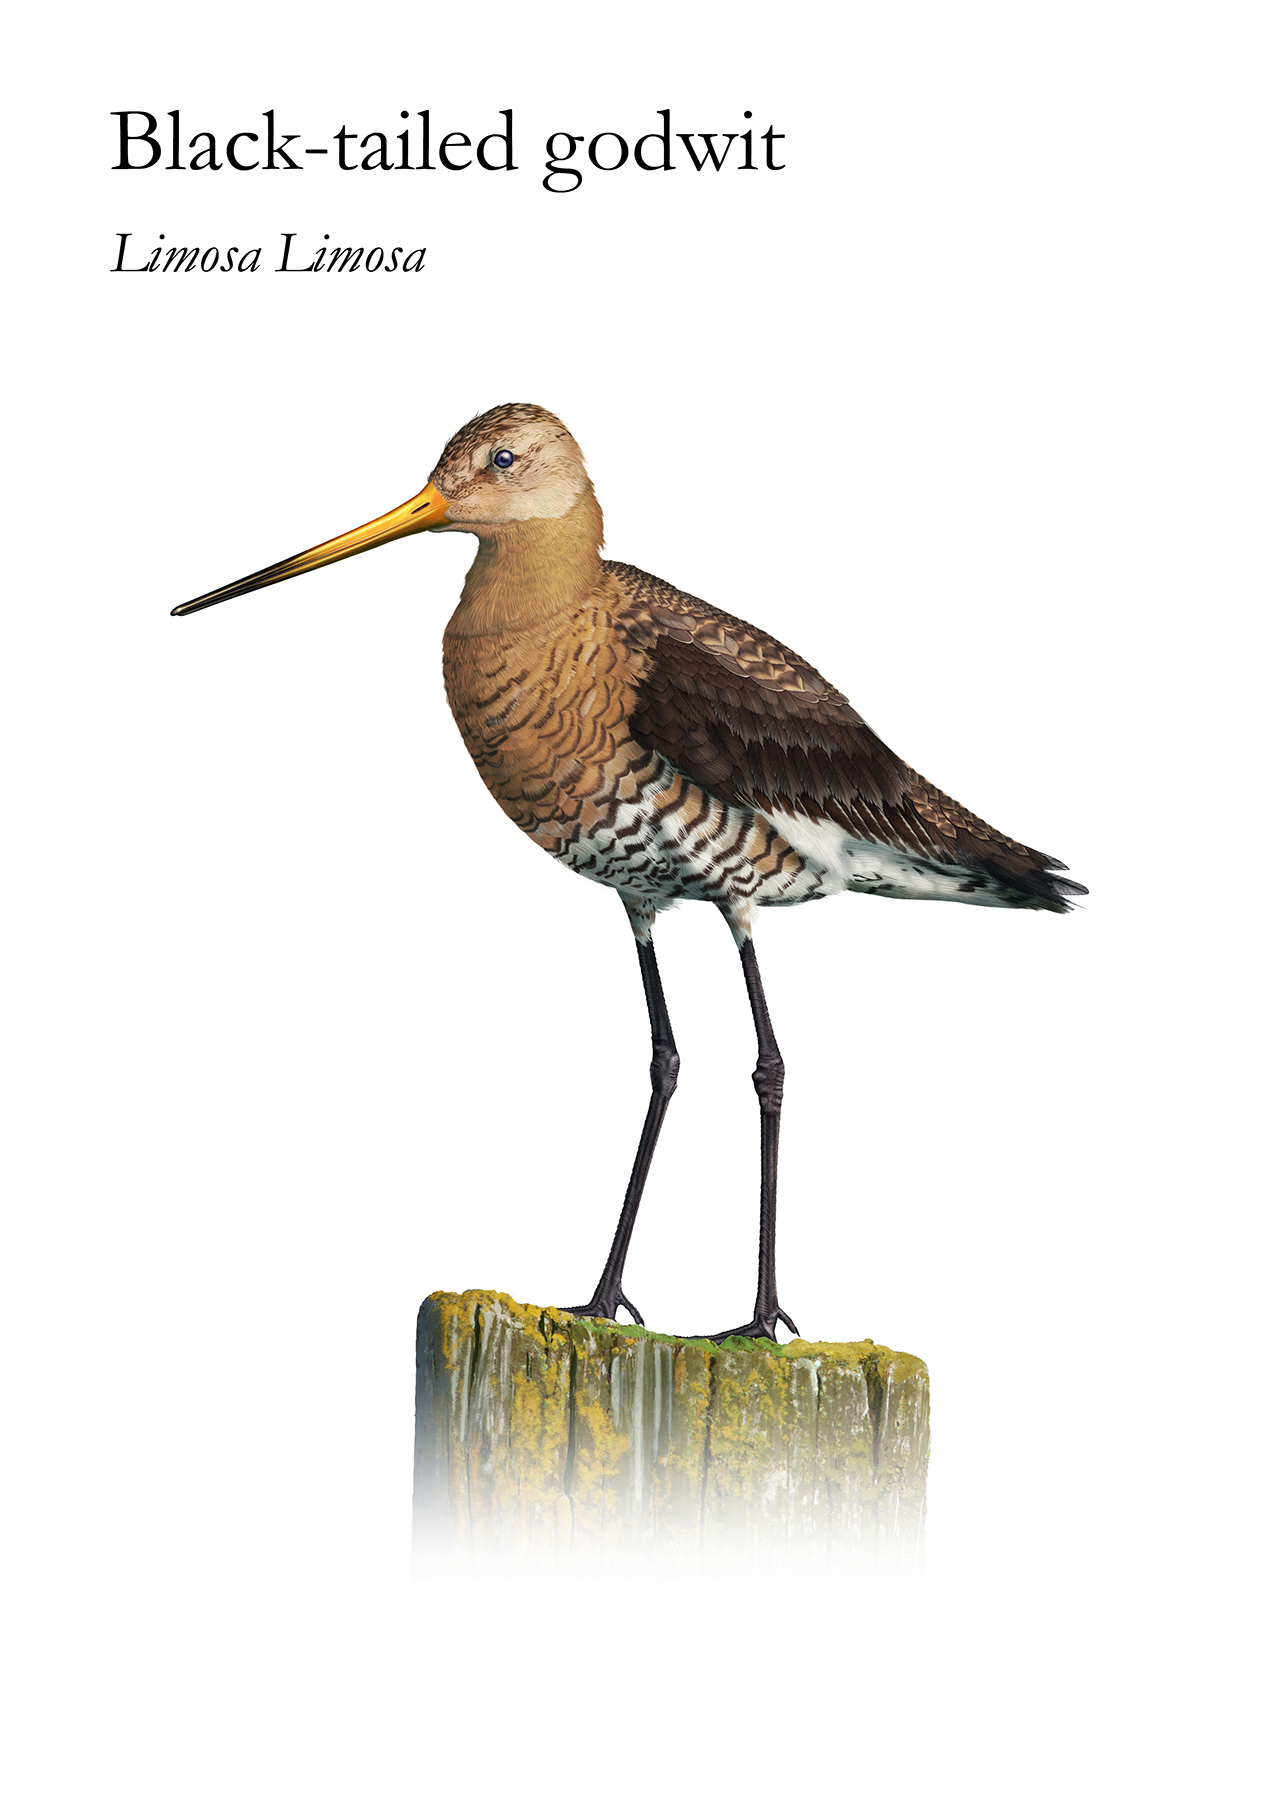 The Black Tailed Godwit is a bird living near the water and is a large long-legged long-billed shorebird